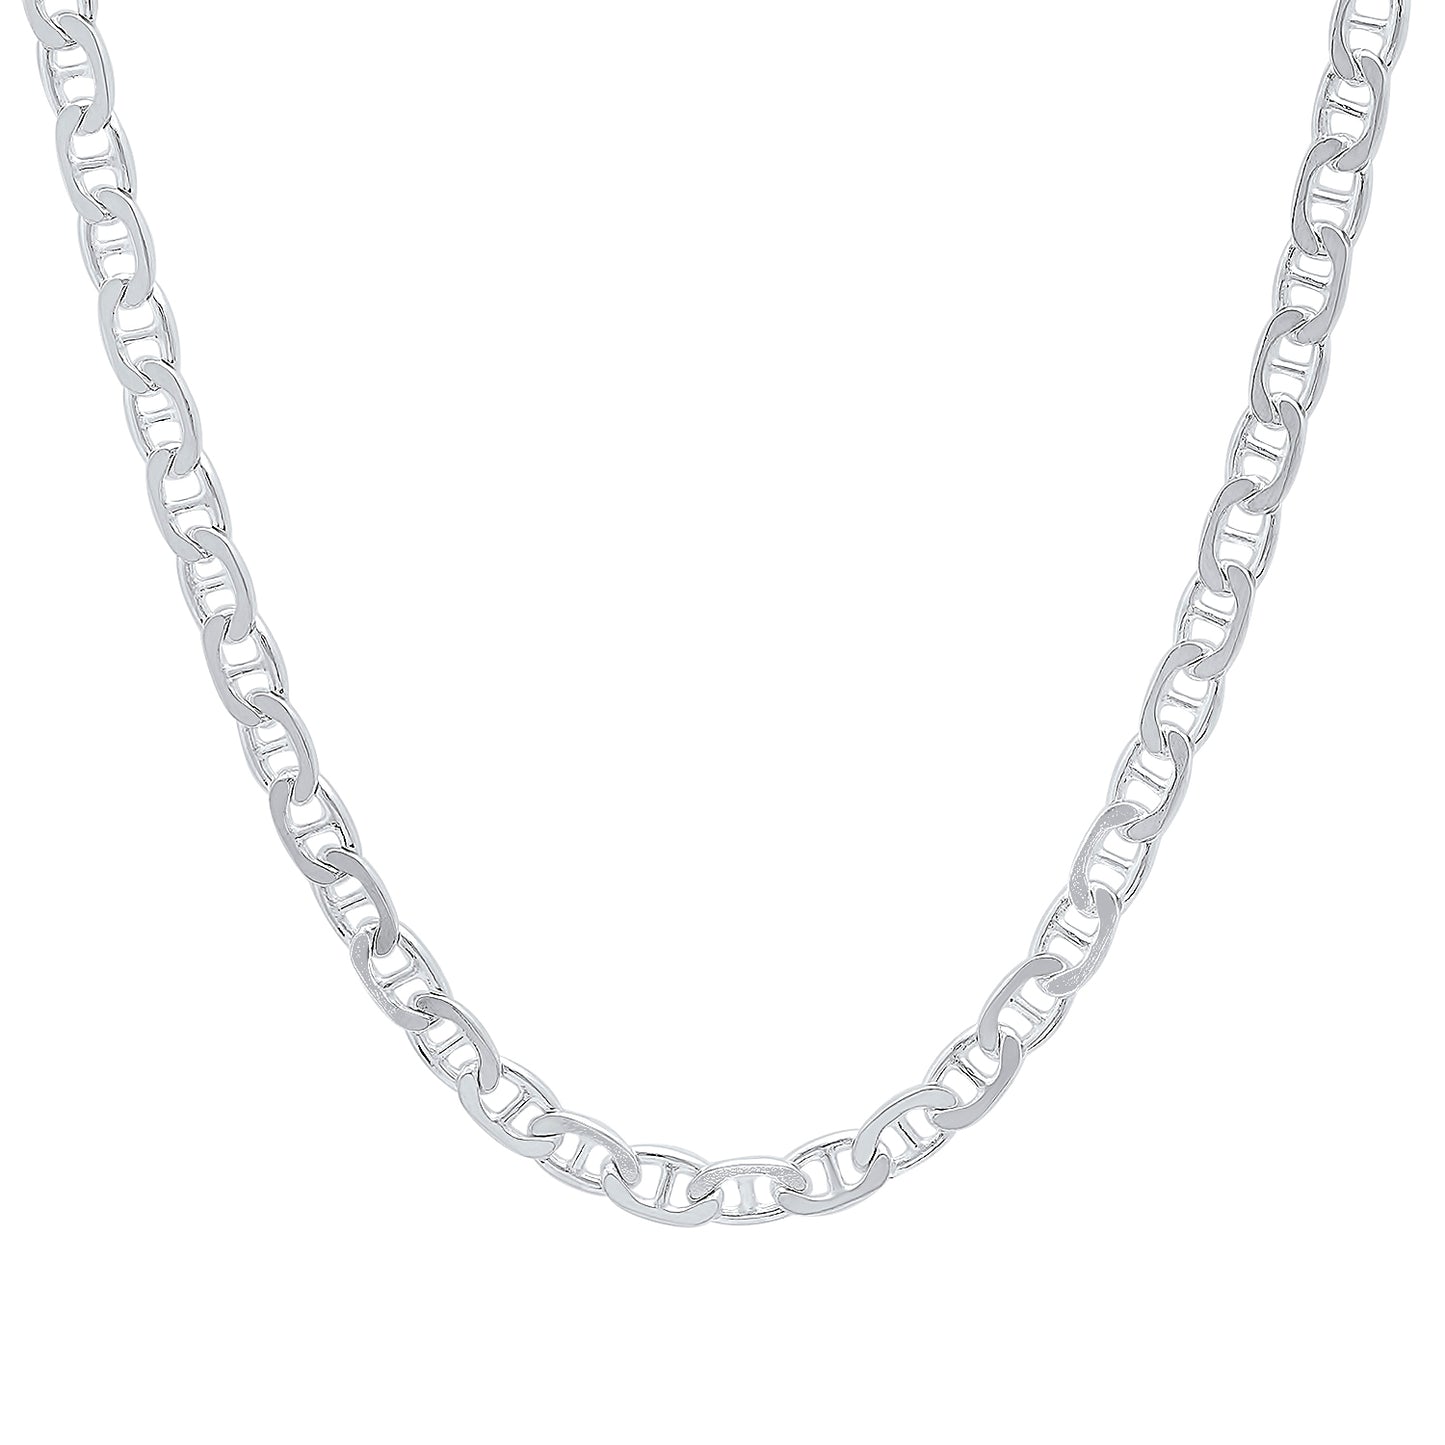 3.5mm High-Polished .925 Sterling Silver (Nickel Free) Flat Mariner Chain Necklace, 7'-40' (SKU: NK1201)